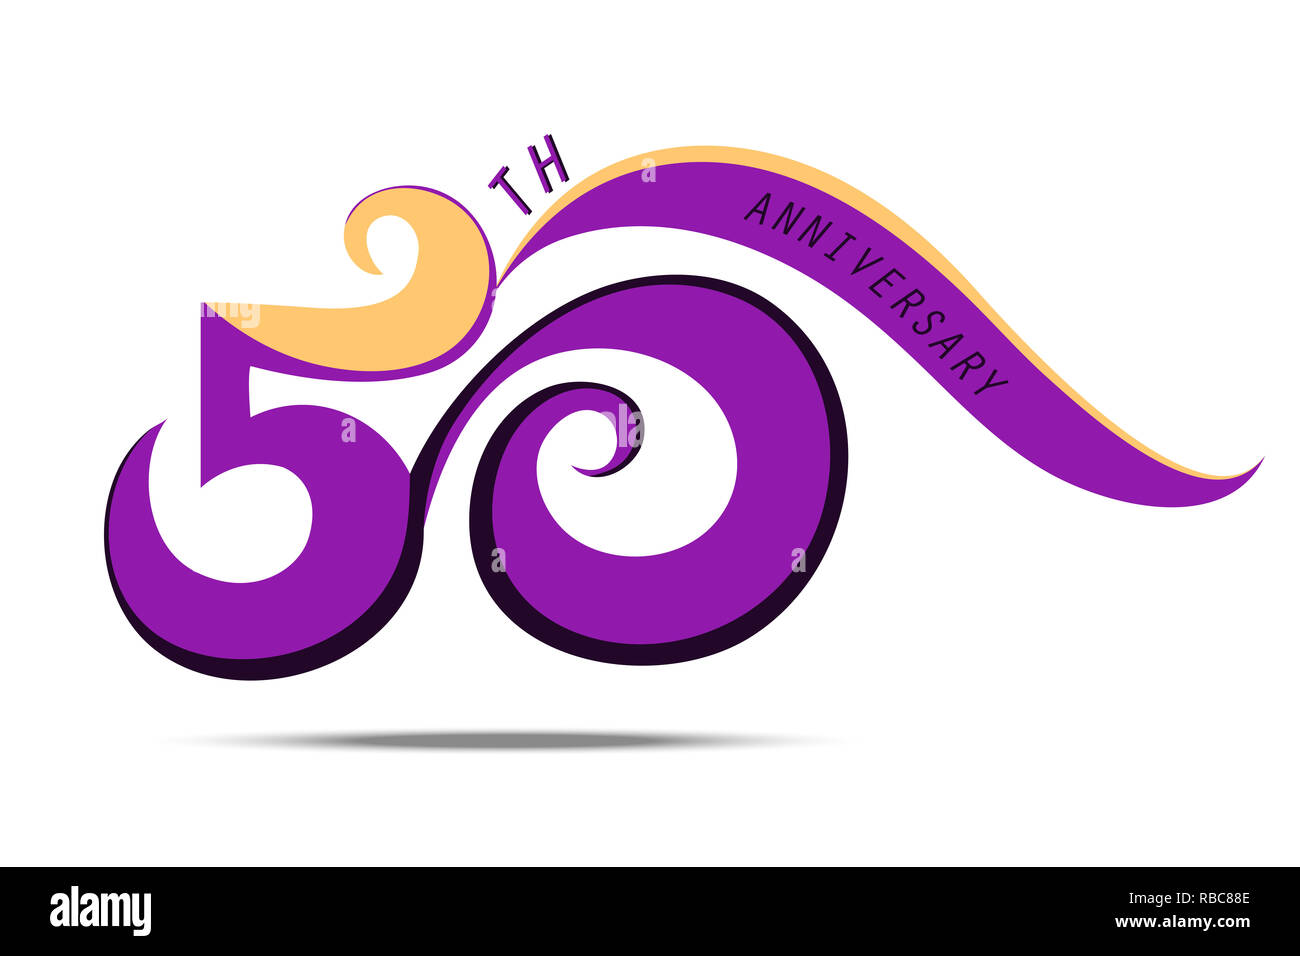 50 th anniversary and celebration, violet number logo and sign art on white background Stock Photo